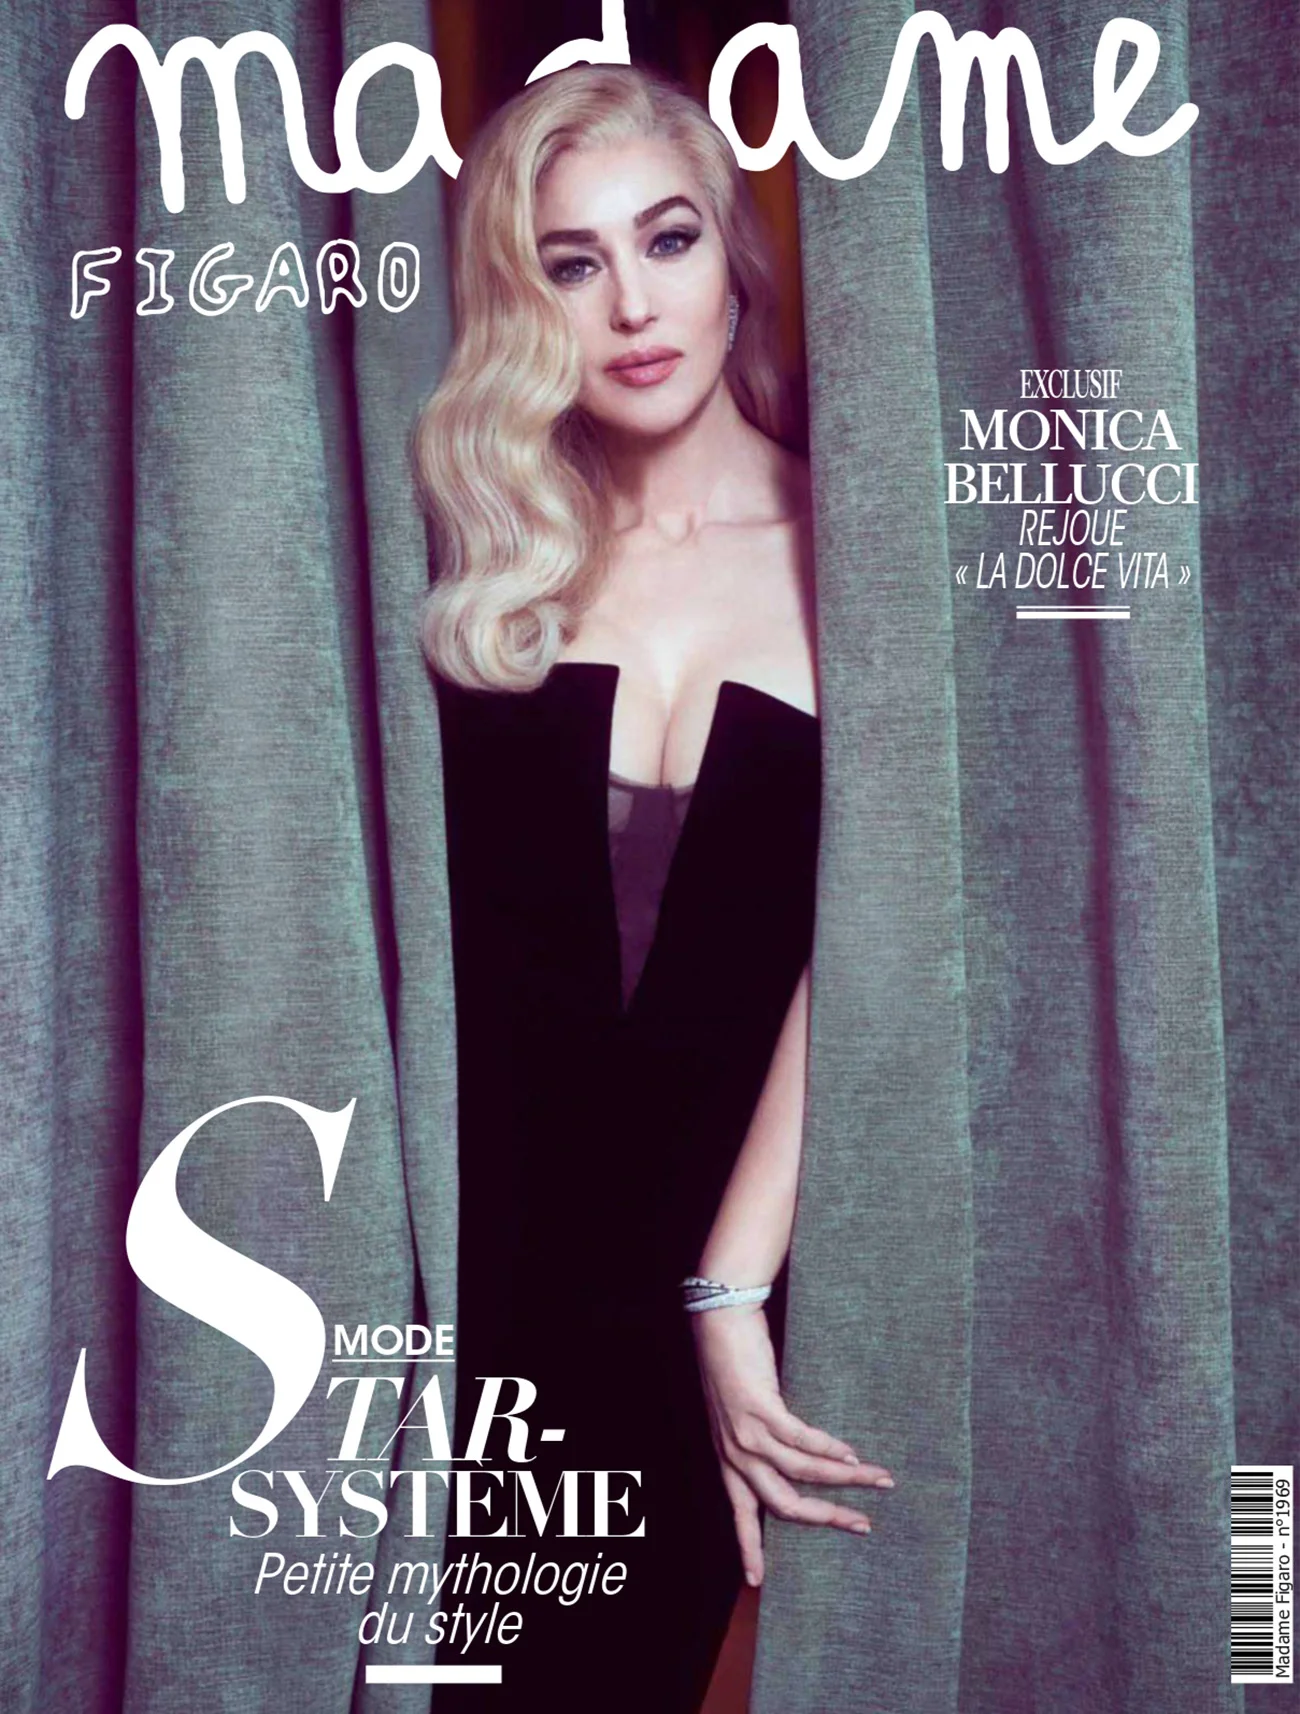 Monica Bellucci covers Madame Figaro May 20th, 2022 by Thiemo Sander